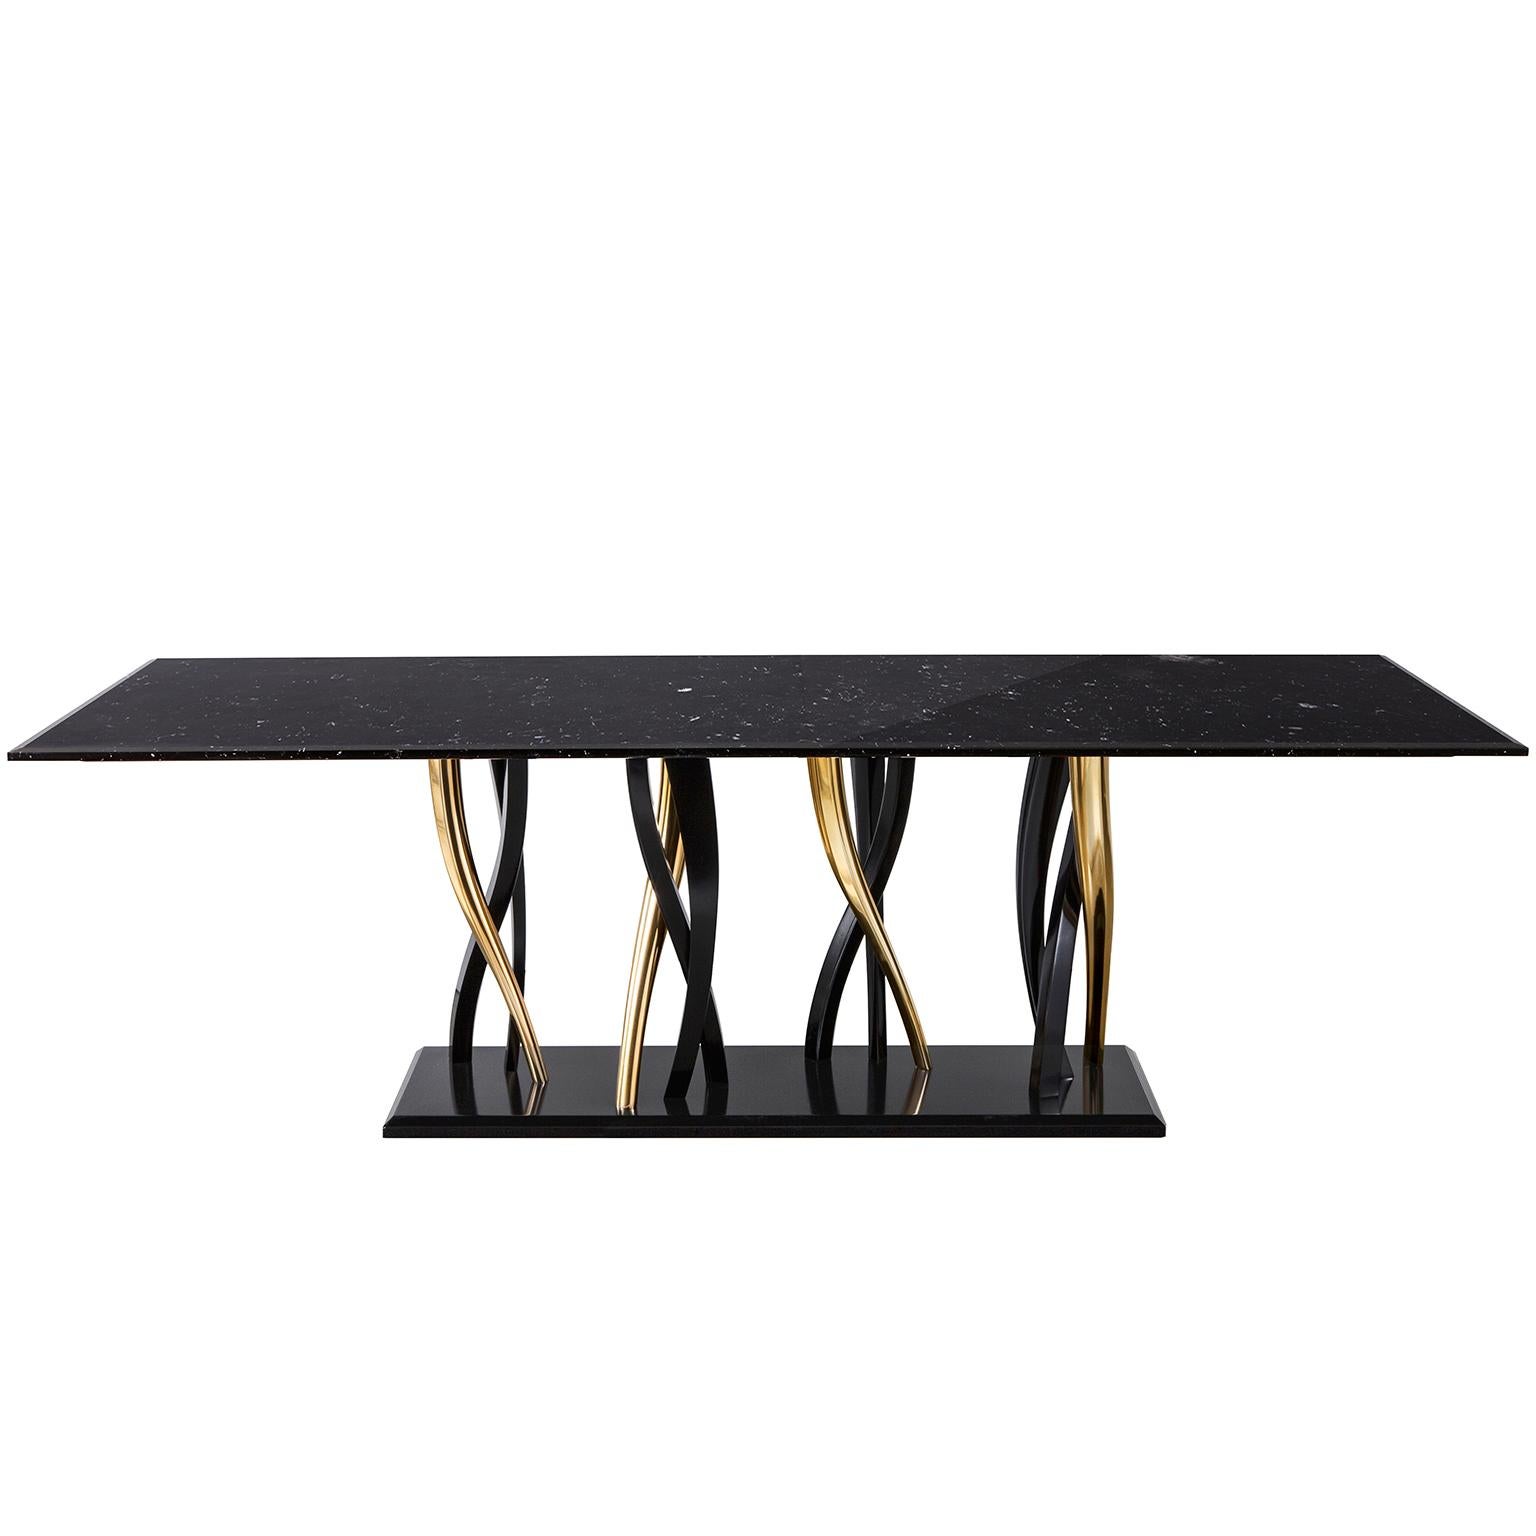 "Il Pezzo 8 Marble Table" dining table in Marquinia marble - black and gold base